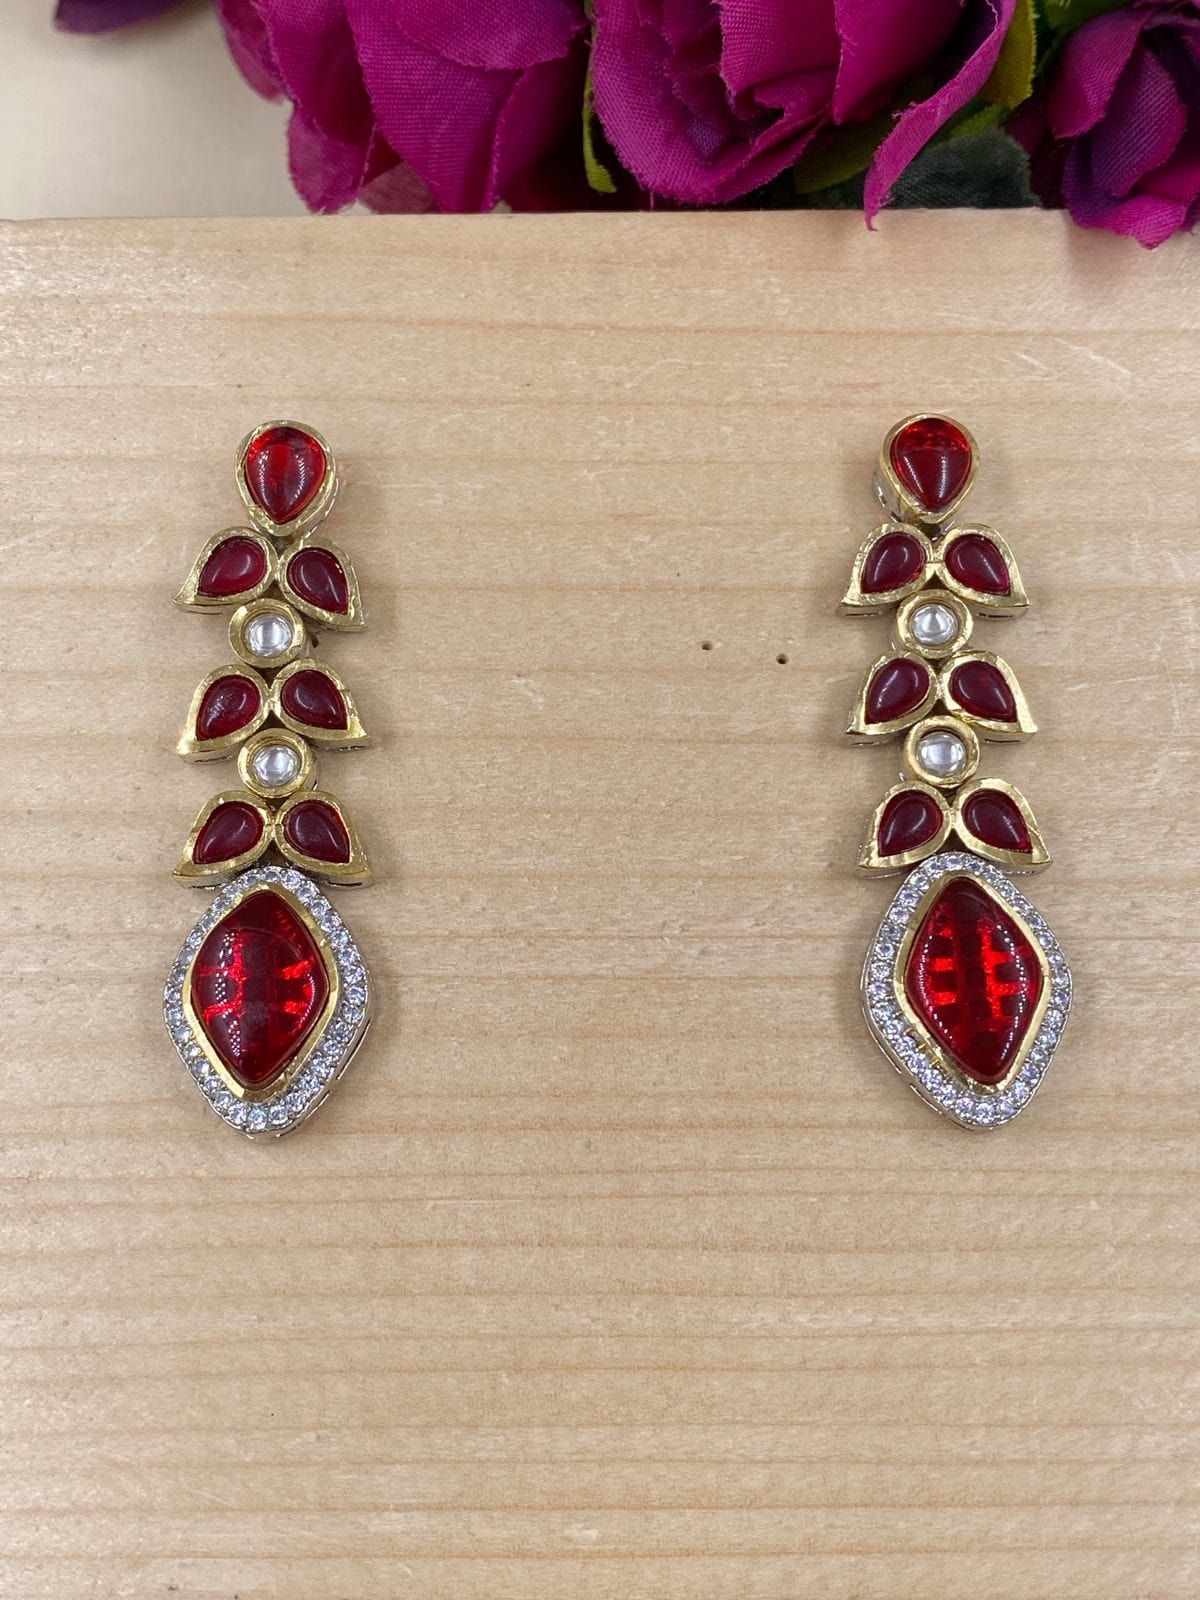 White Red Pearl Indian Jhumka Earrings | FashionCrab.com